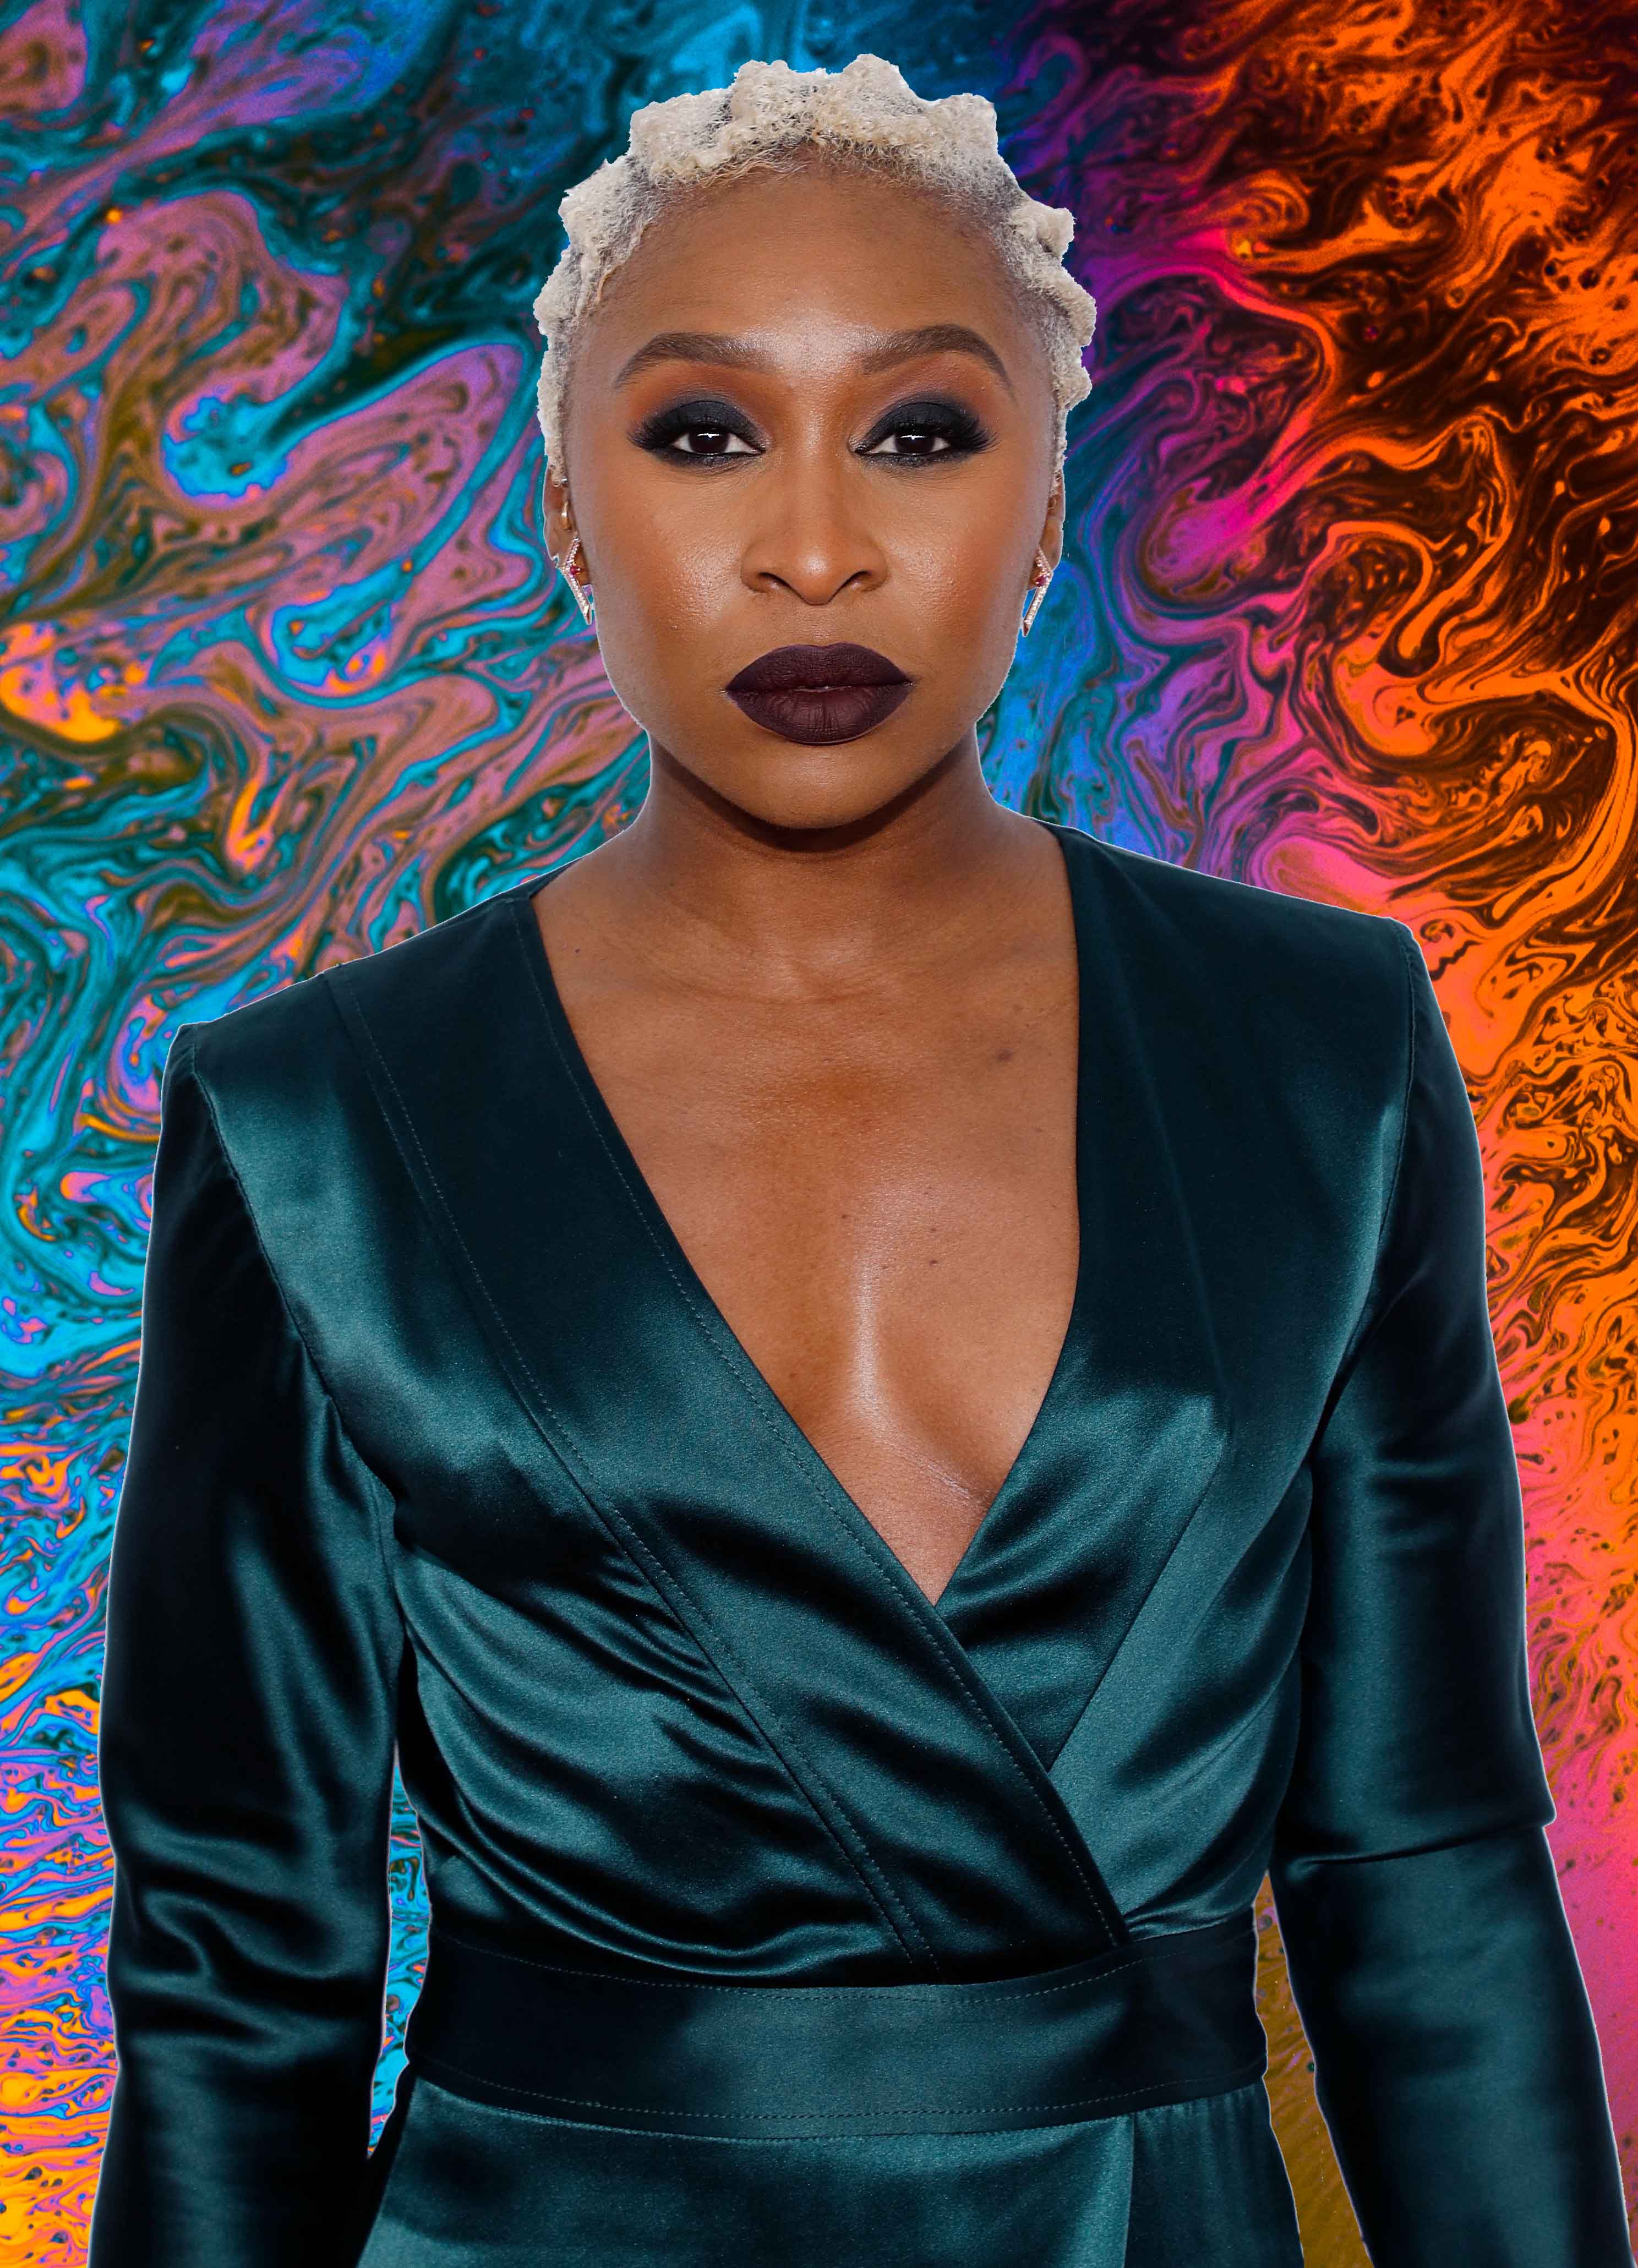 Cynthia Erivo Has A Message For Those Who Think Blonde Hair Makes Her Less 'Woke'